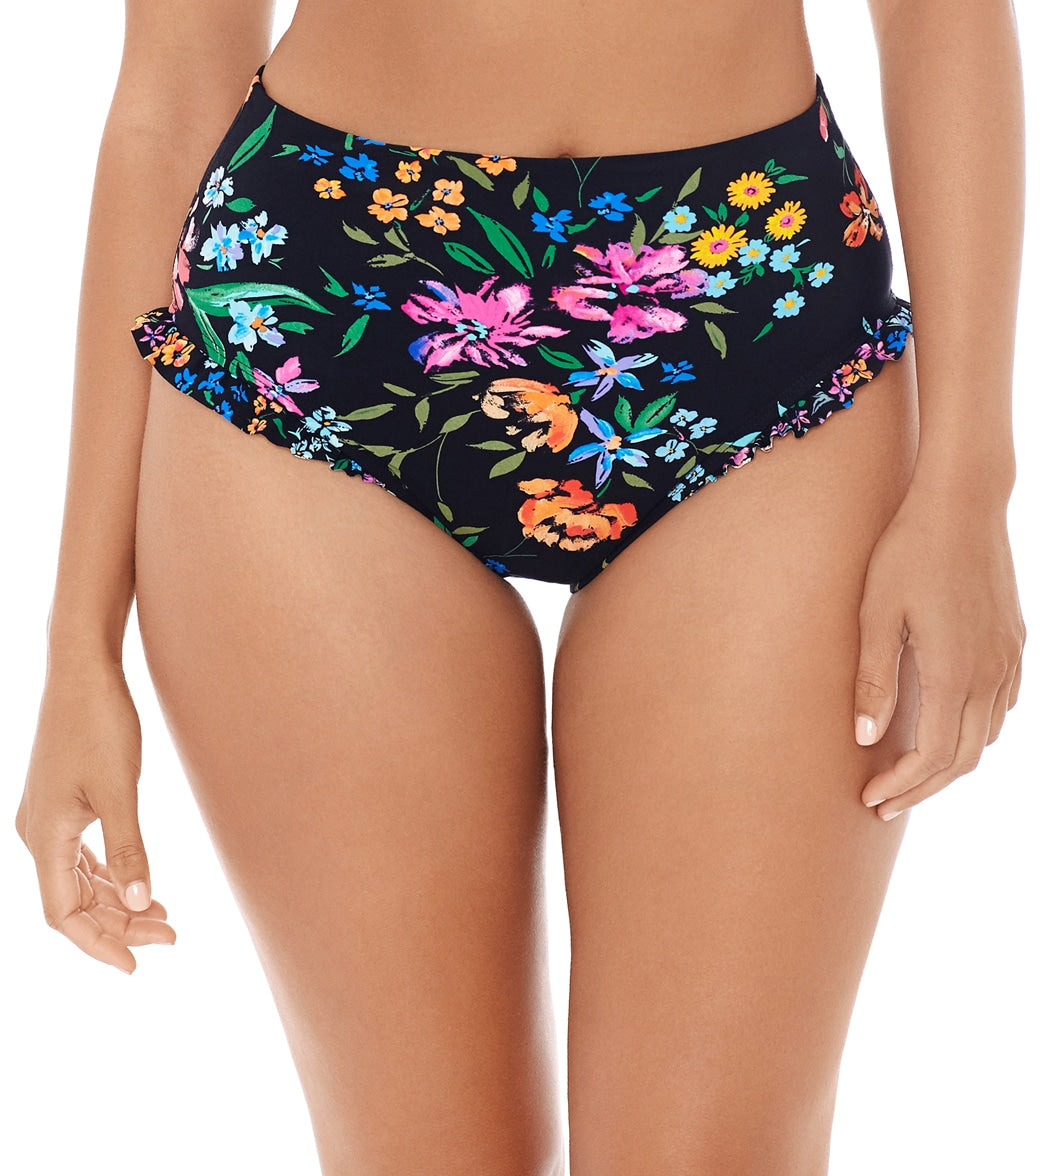 Skinny Dippers By Miraclesuit Women's Baby Kiss Daisy Duke High Waist Bottom - Black Large - Swimoutlet.com